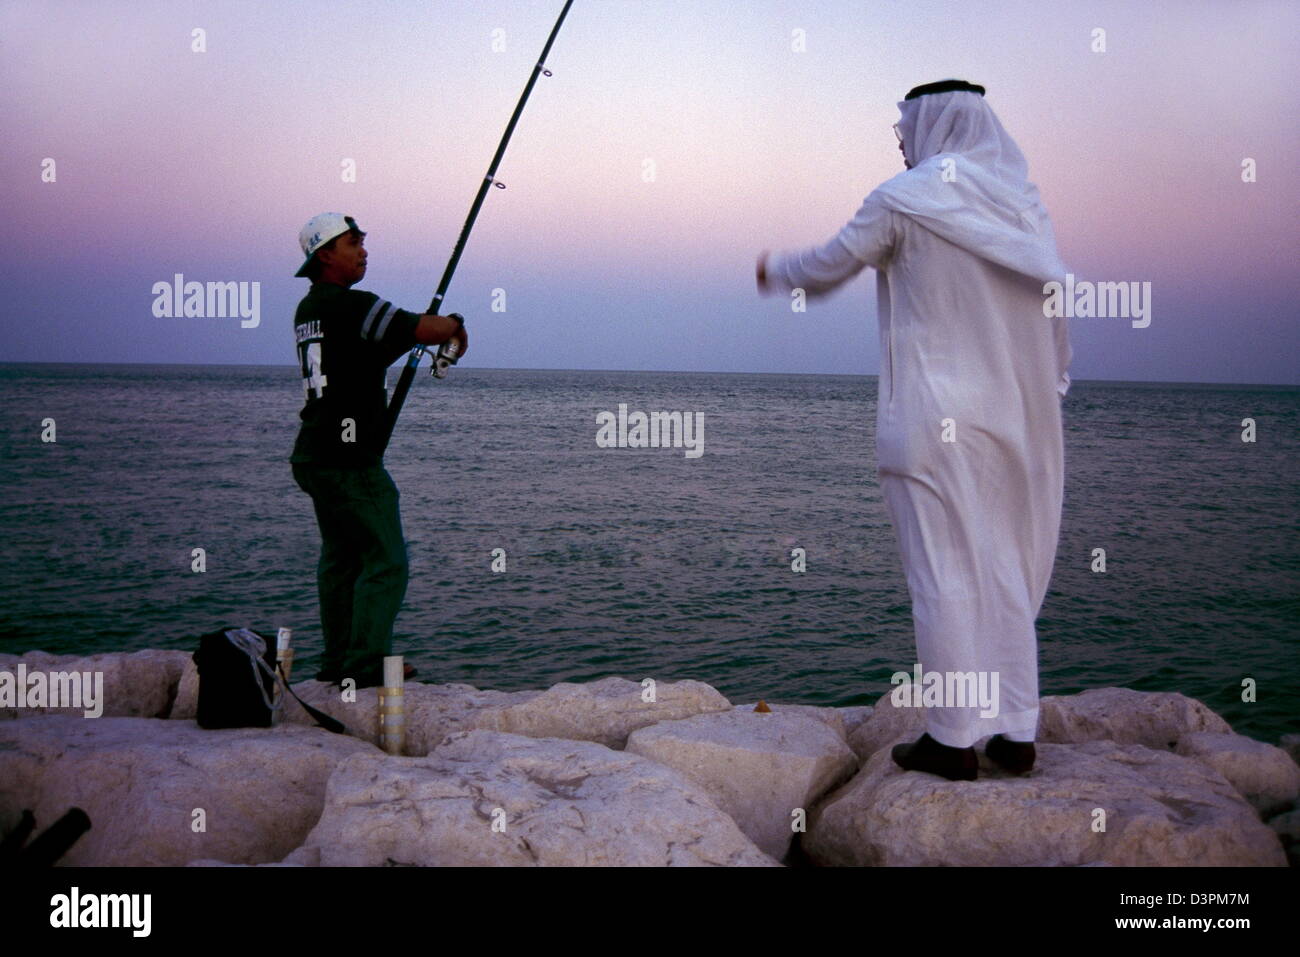 A Saudi chats with a third country national while fishing on his leisure time as the sunsets over the Persian Gulf in al khobar. Stock Photo